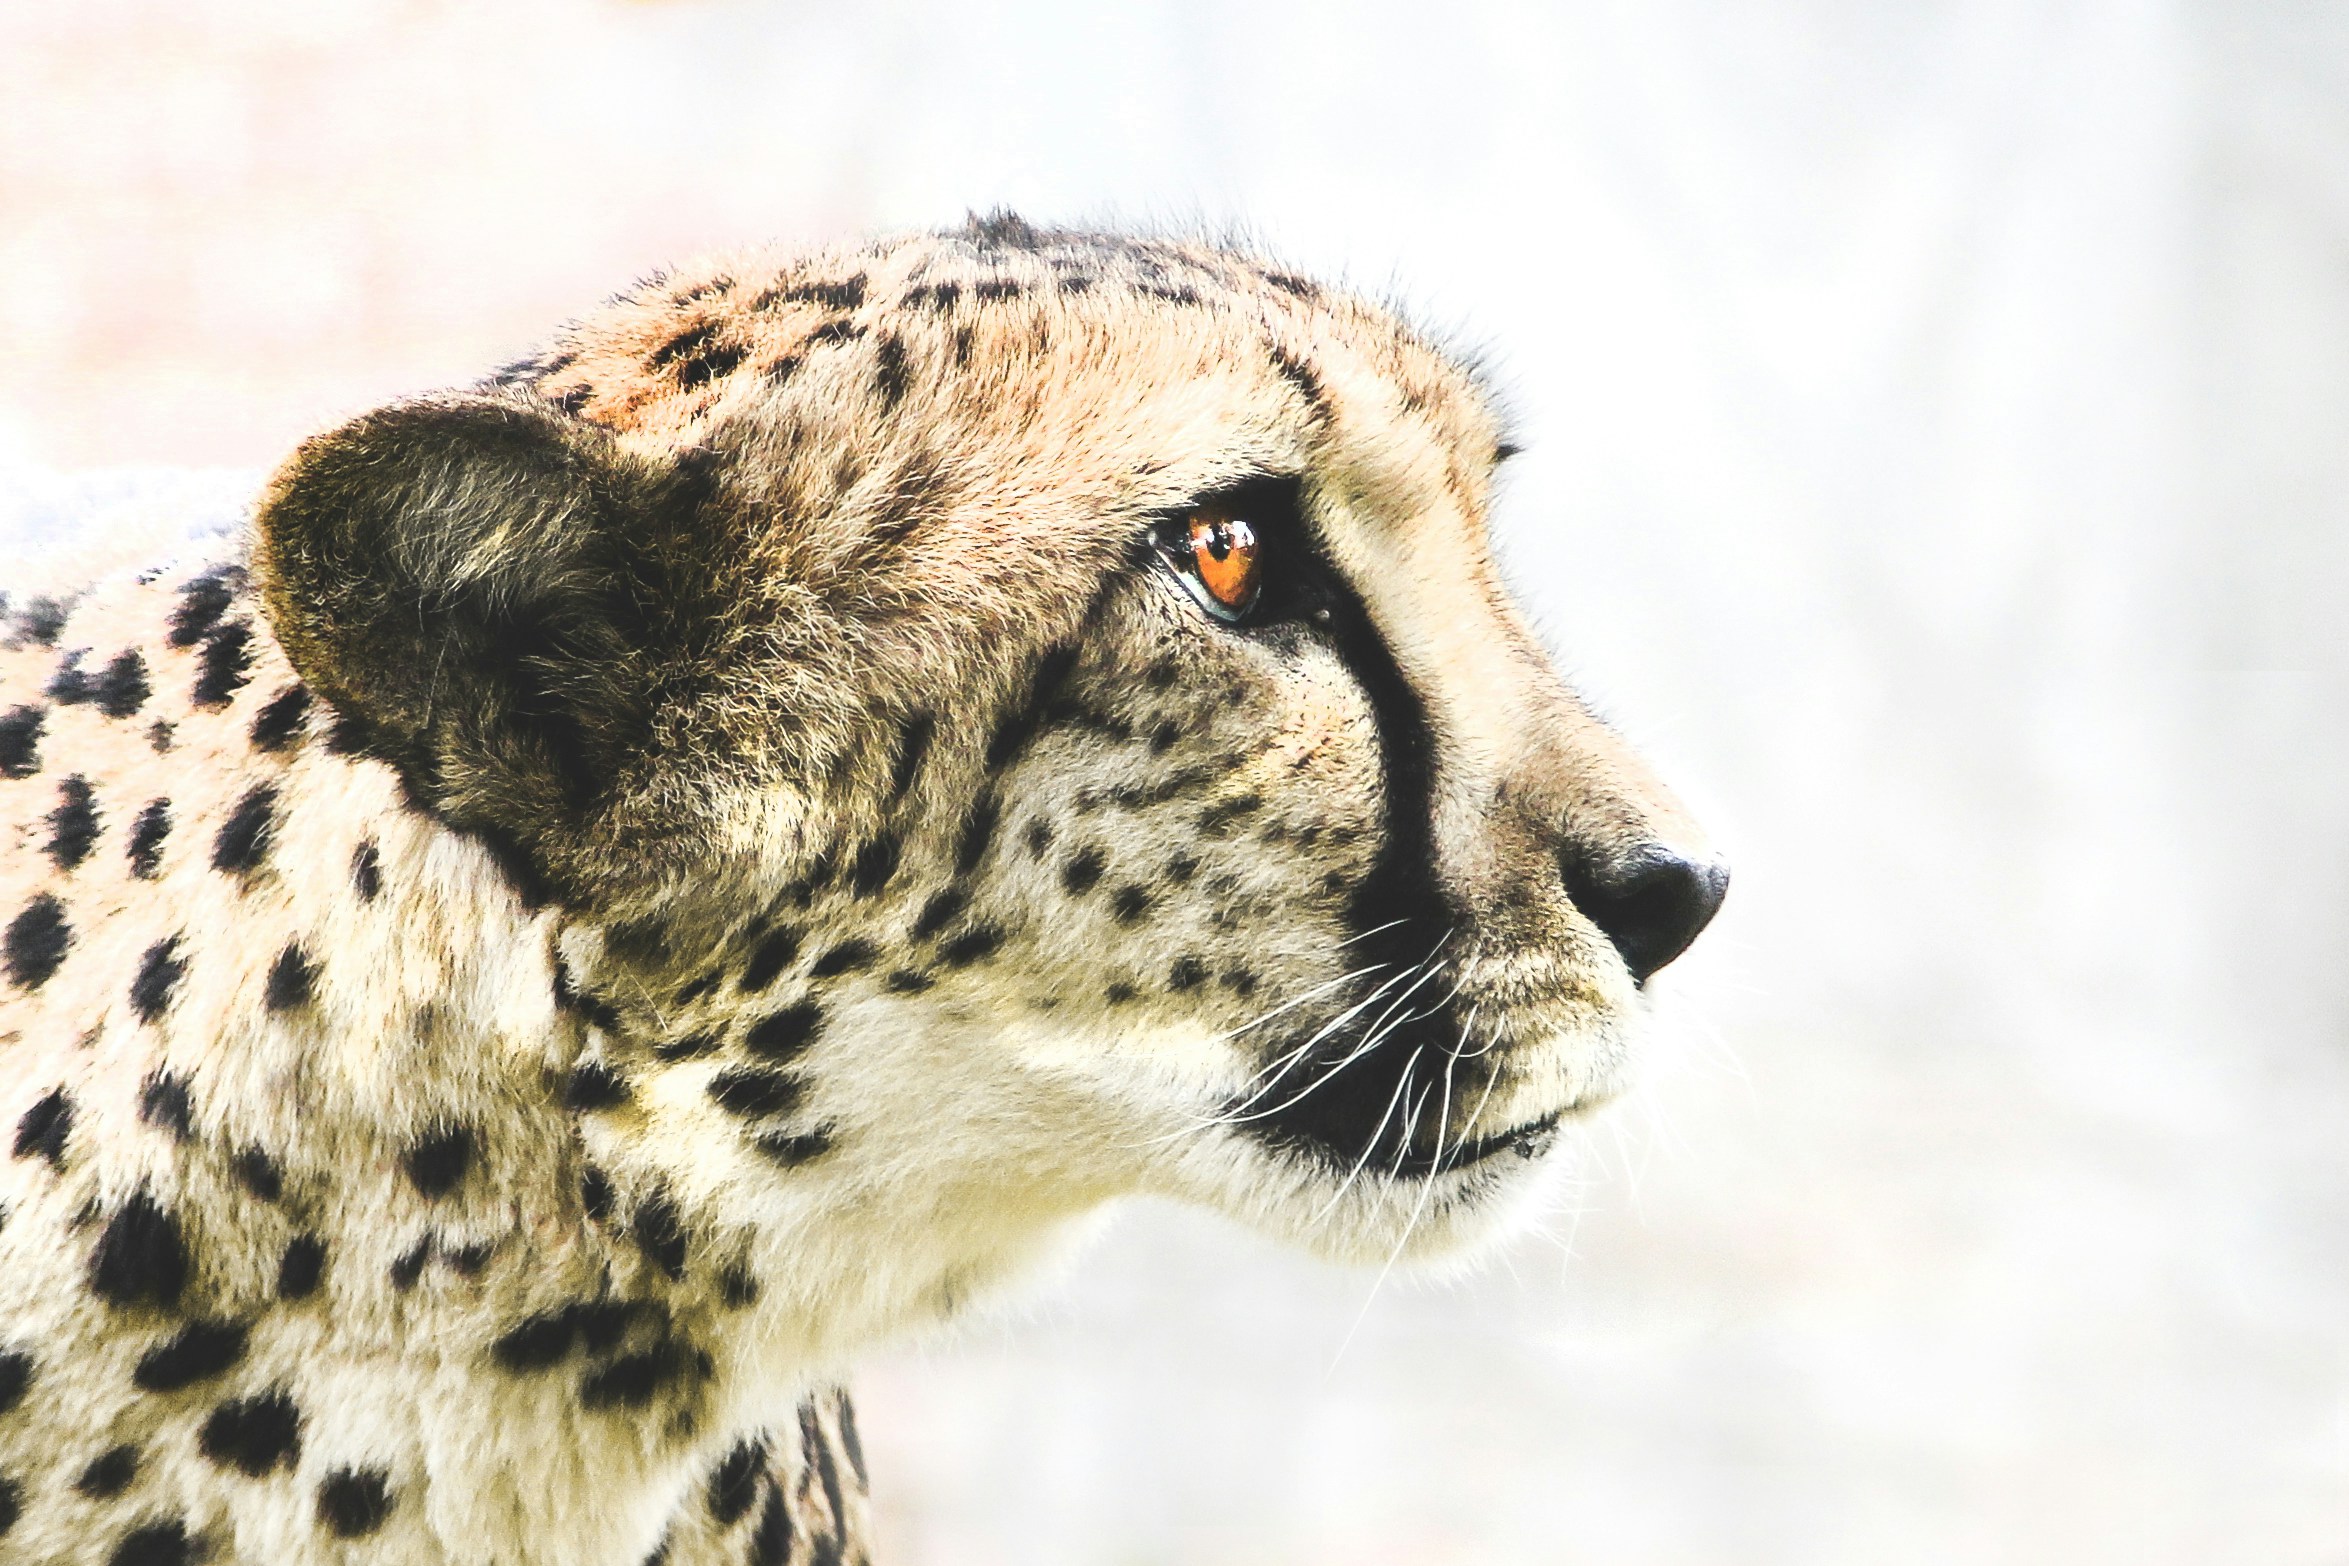 the large white and black cheetah is looking out